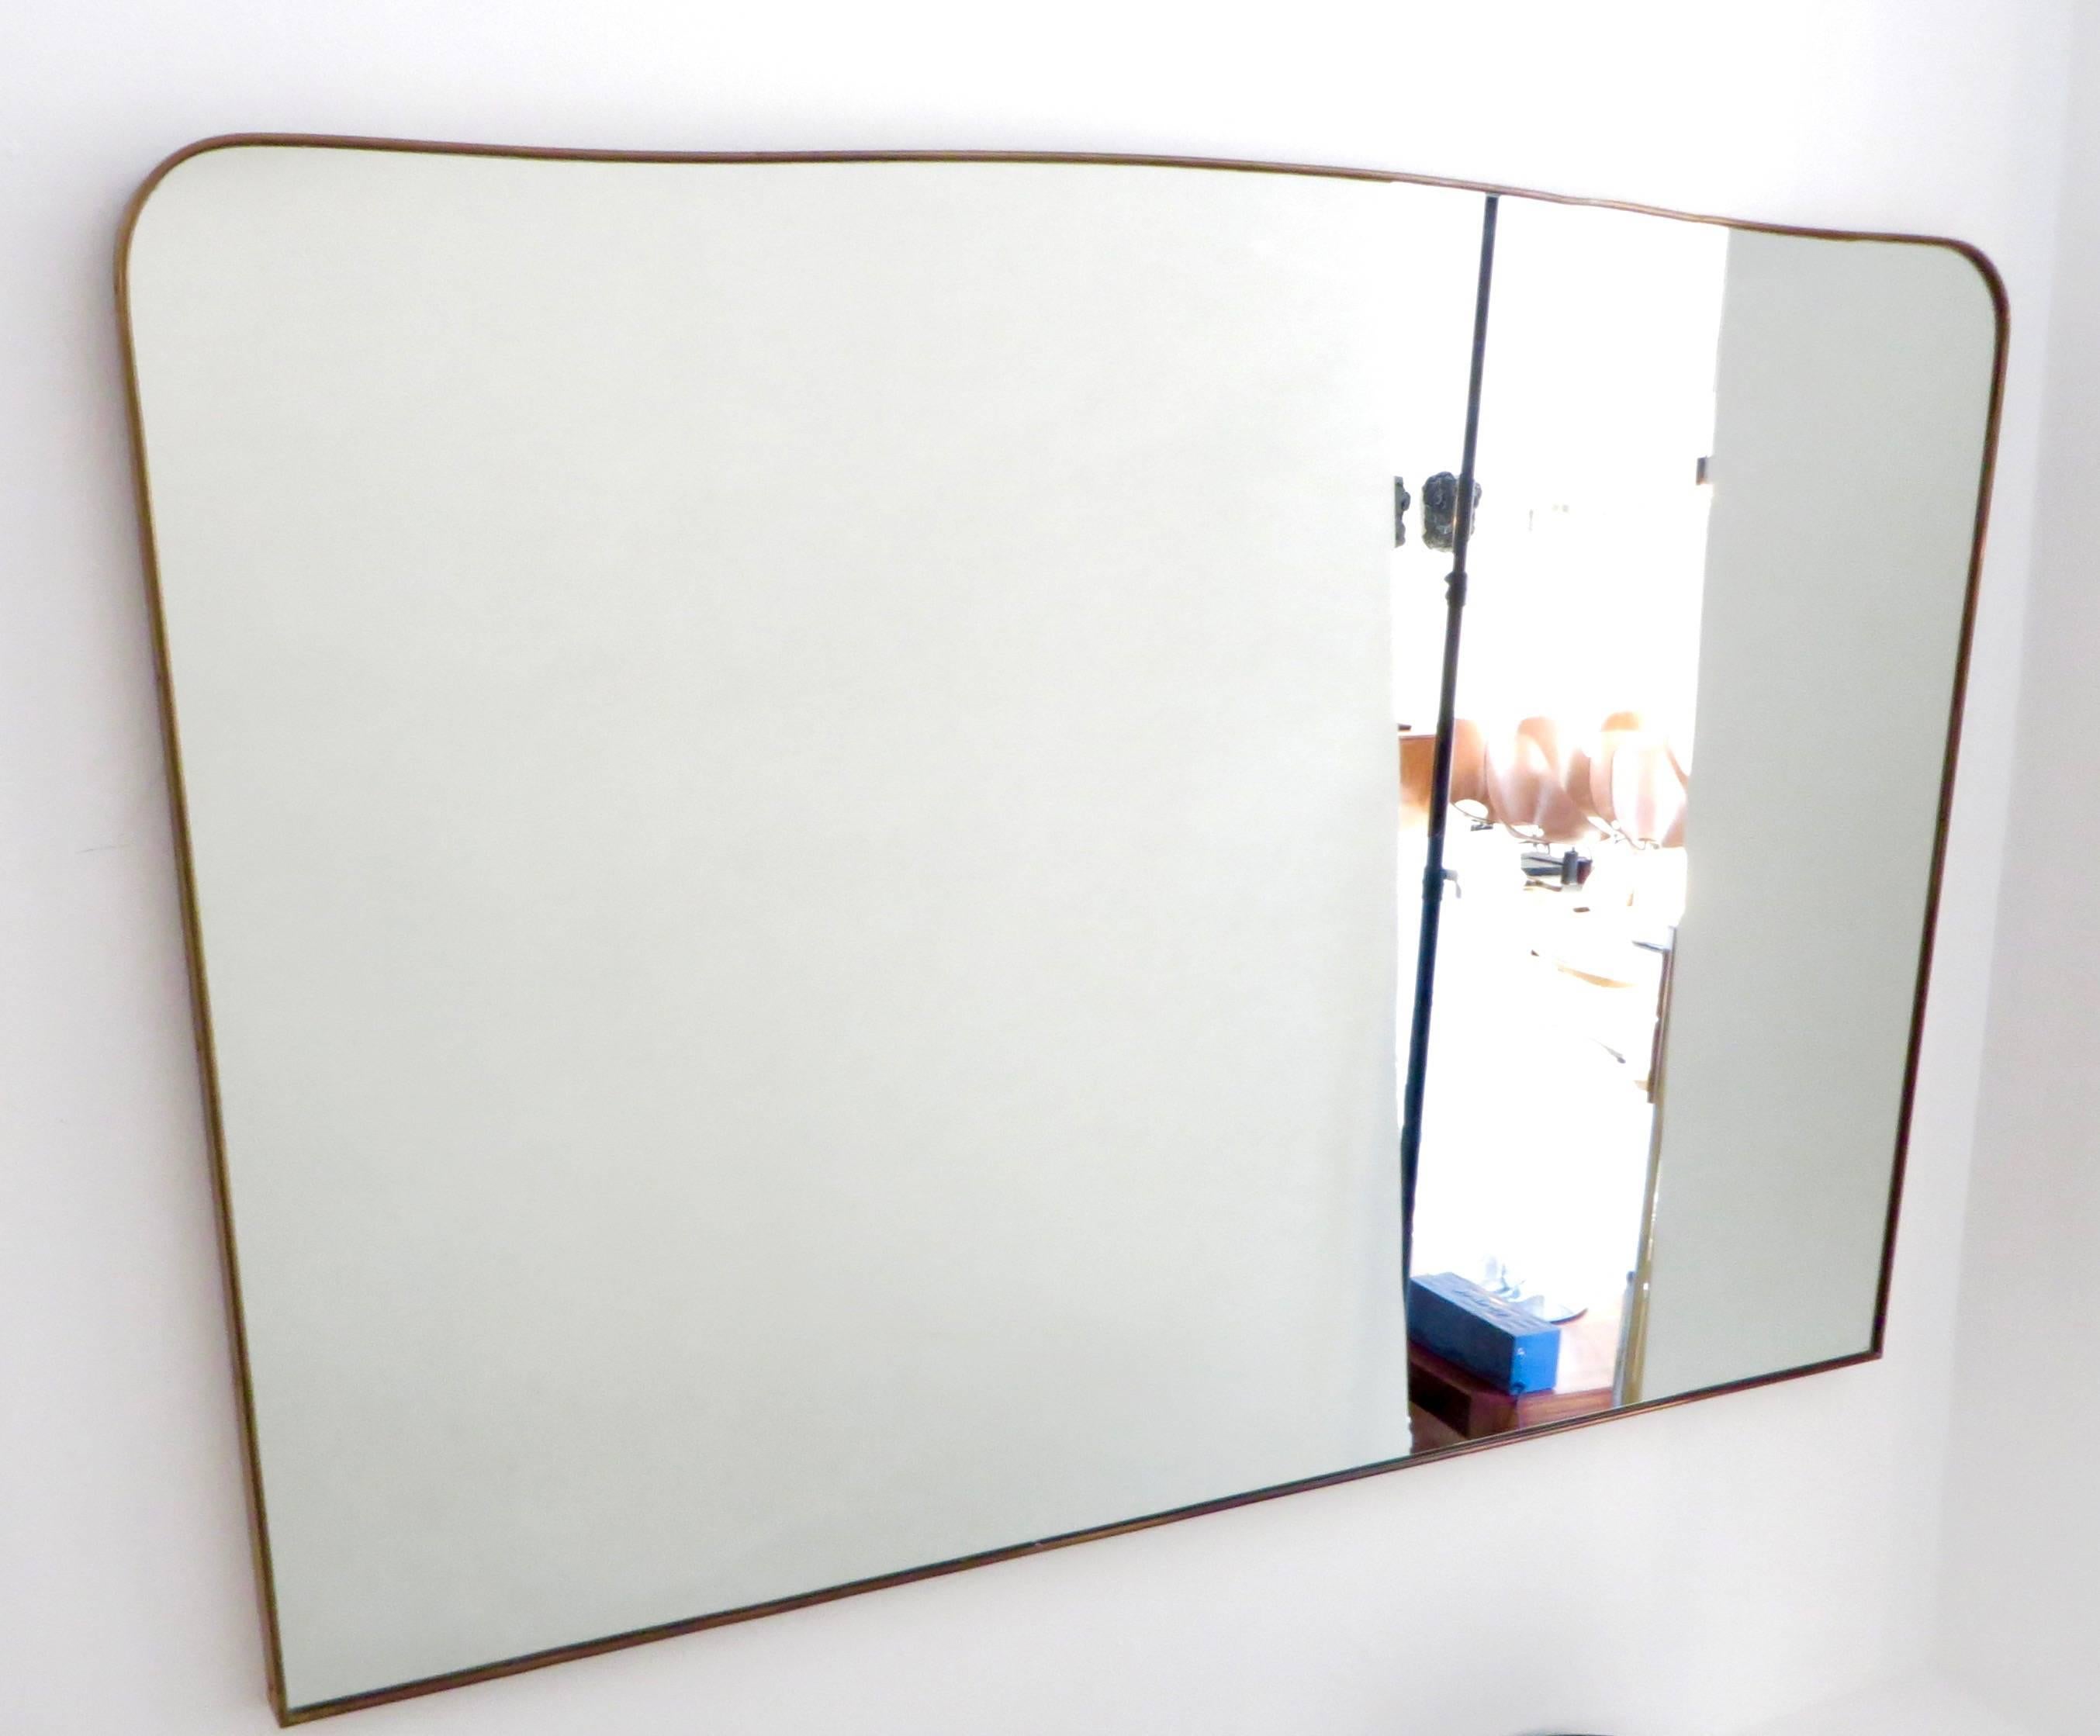 Monumental Italian brass mirror, circa 1940. A soft undulating top edge, with rounded corners and a slight taper in, on the sides. Frame is 1.5